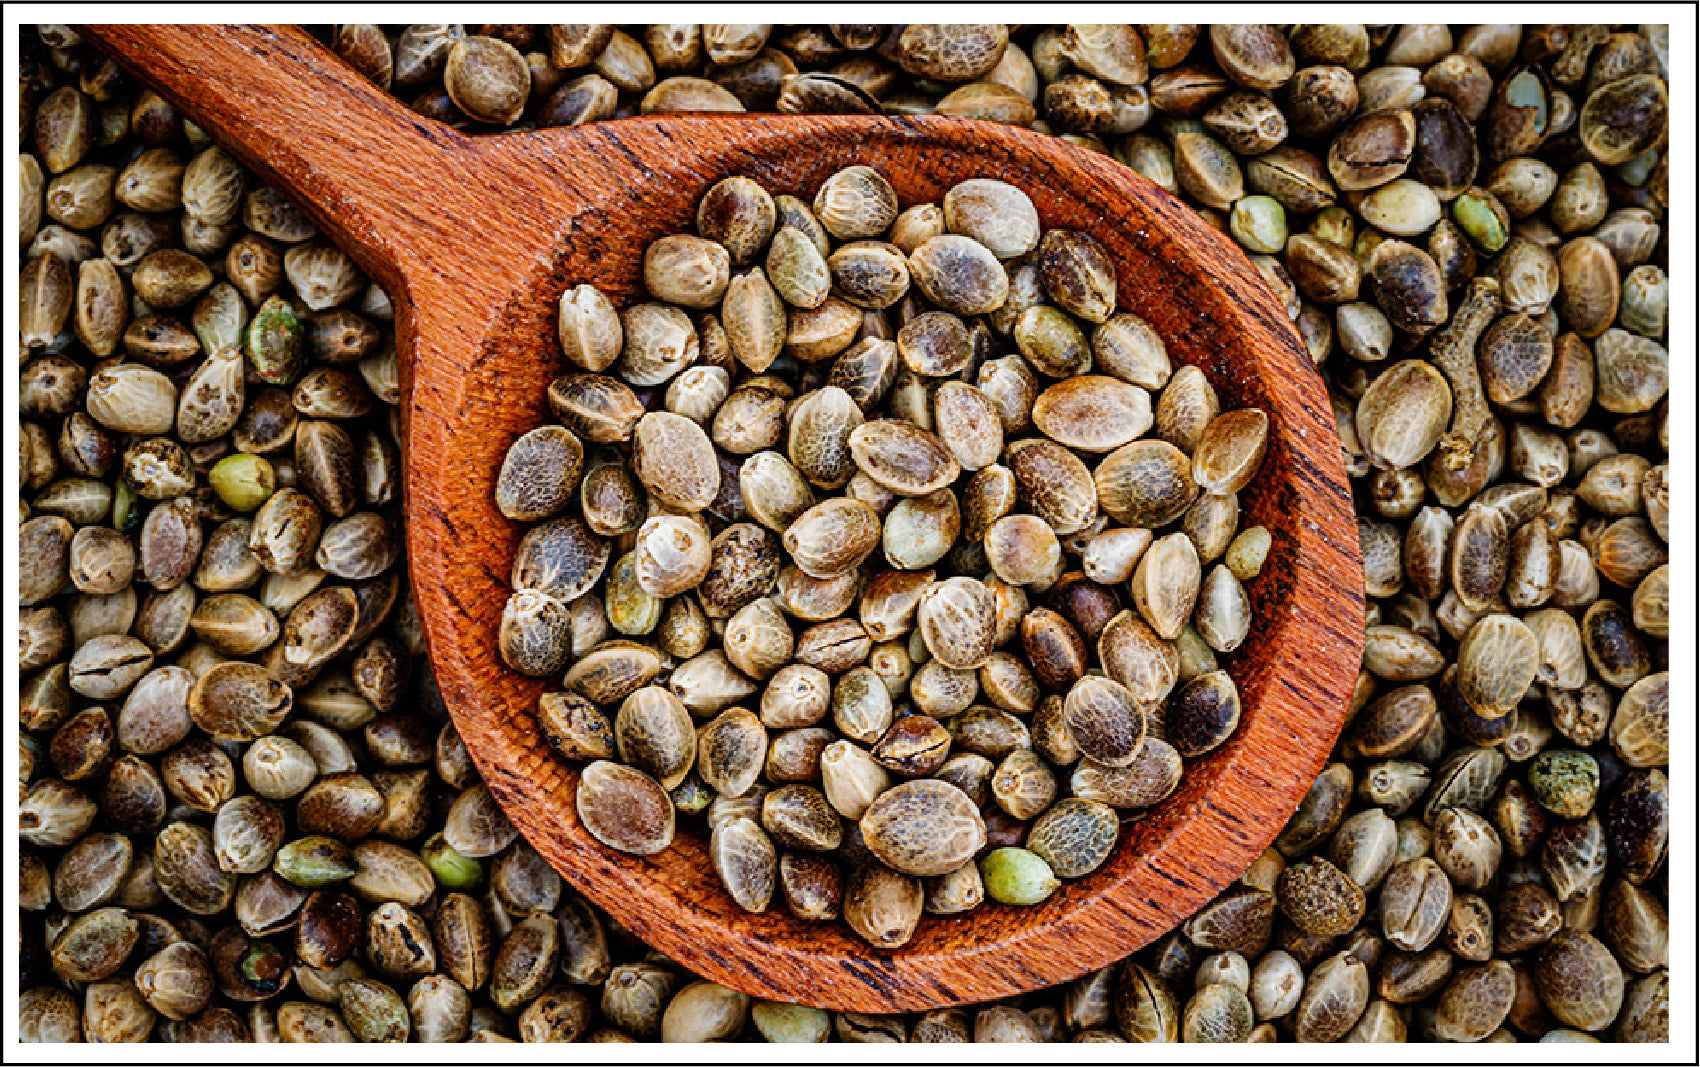 Hemp Seed Oil is a Powerhouse of Vitamins and Nutrients for Your Skin